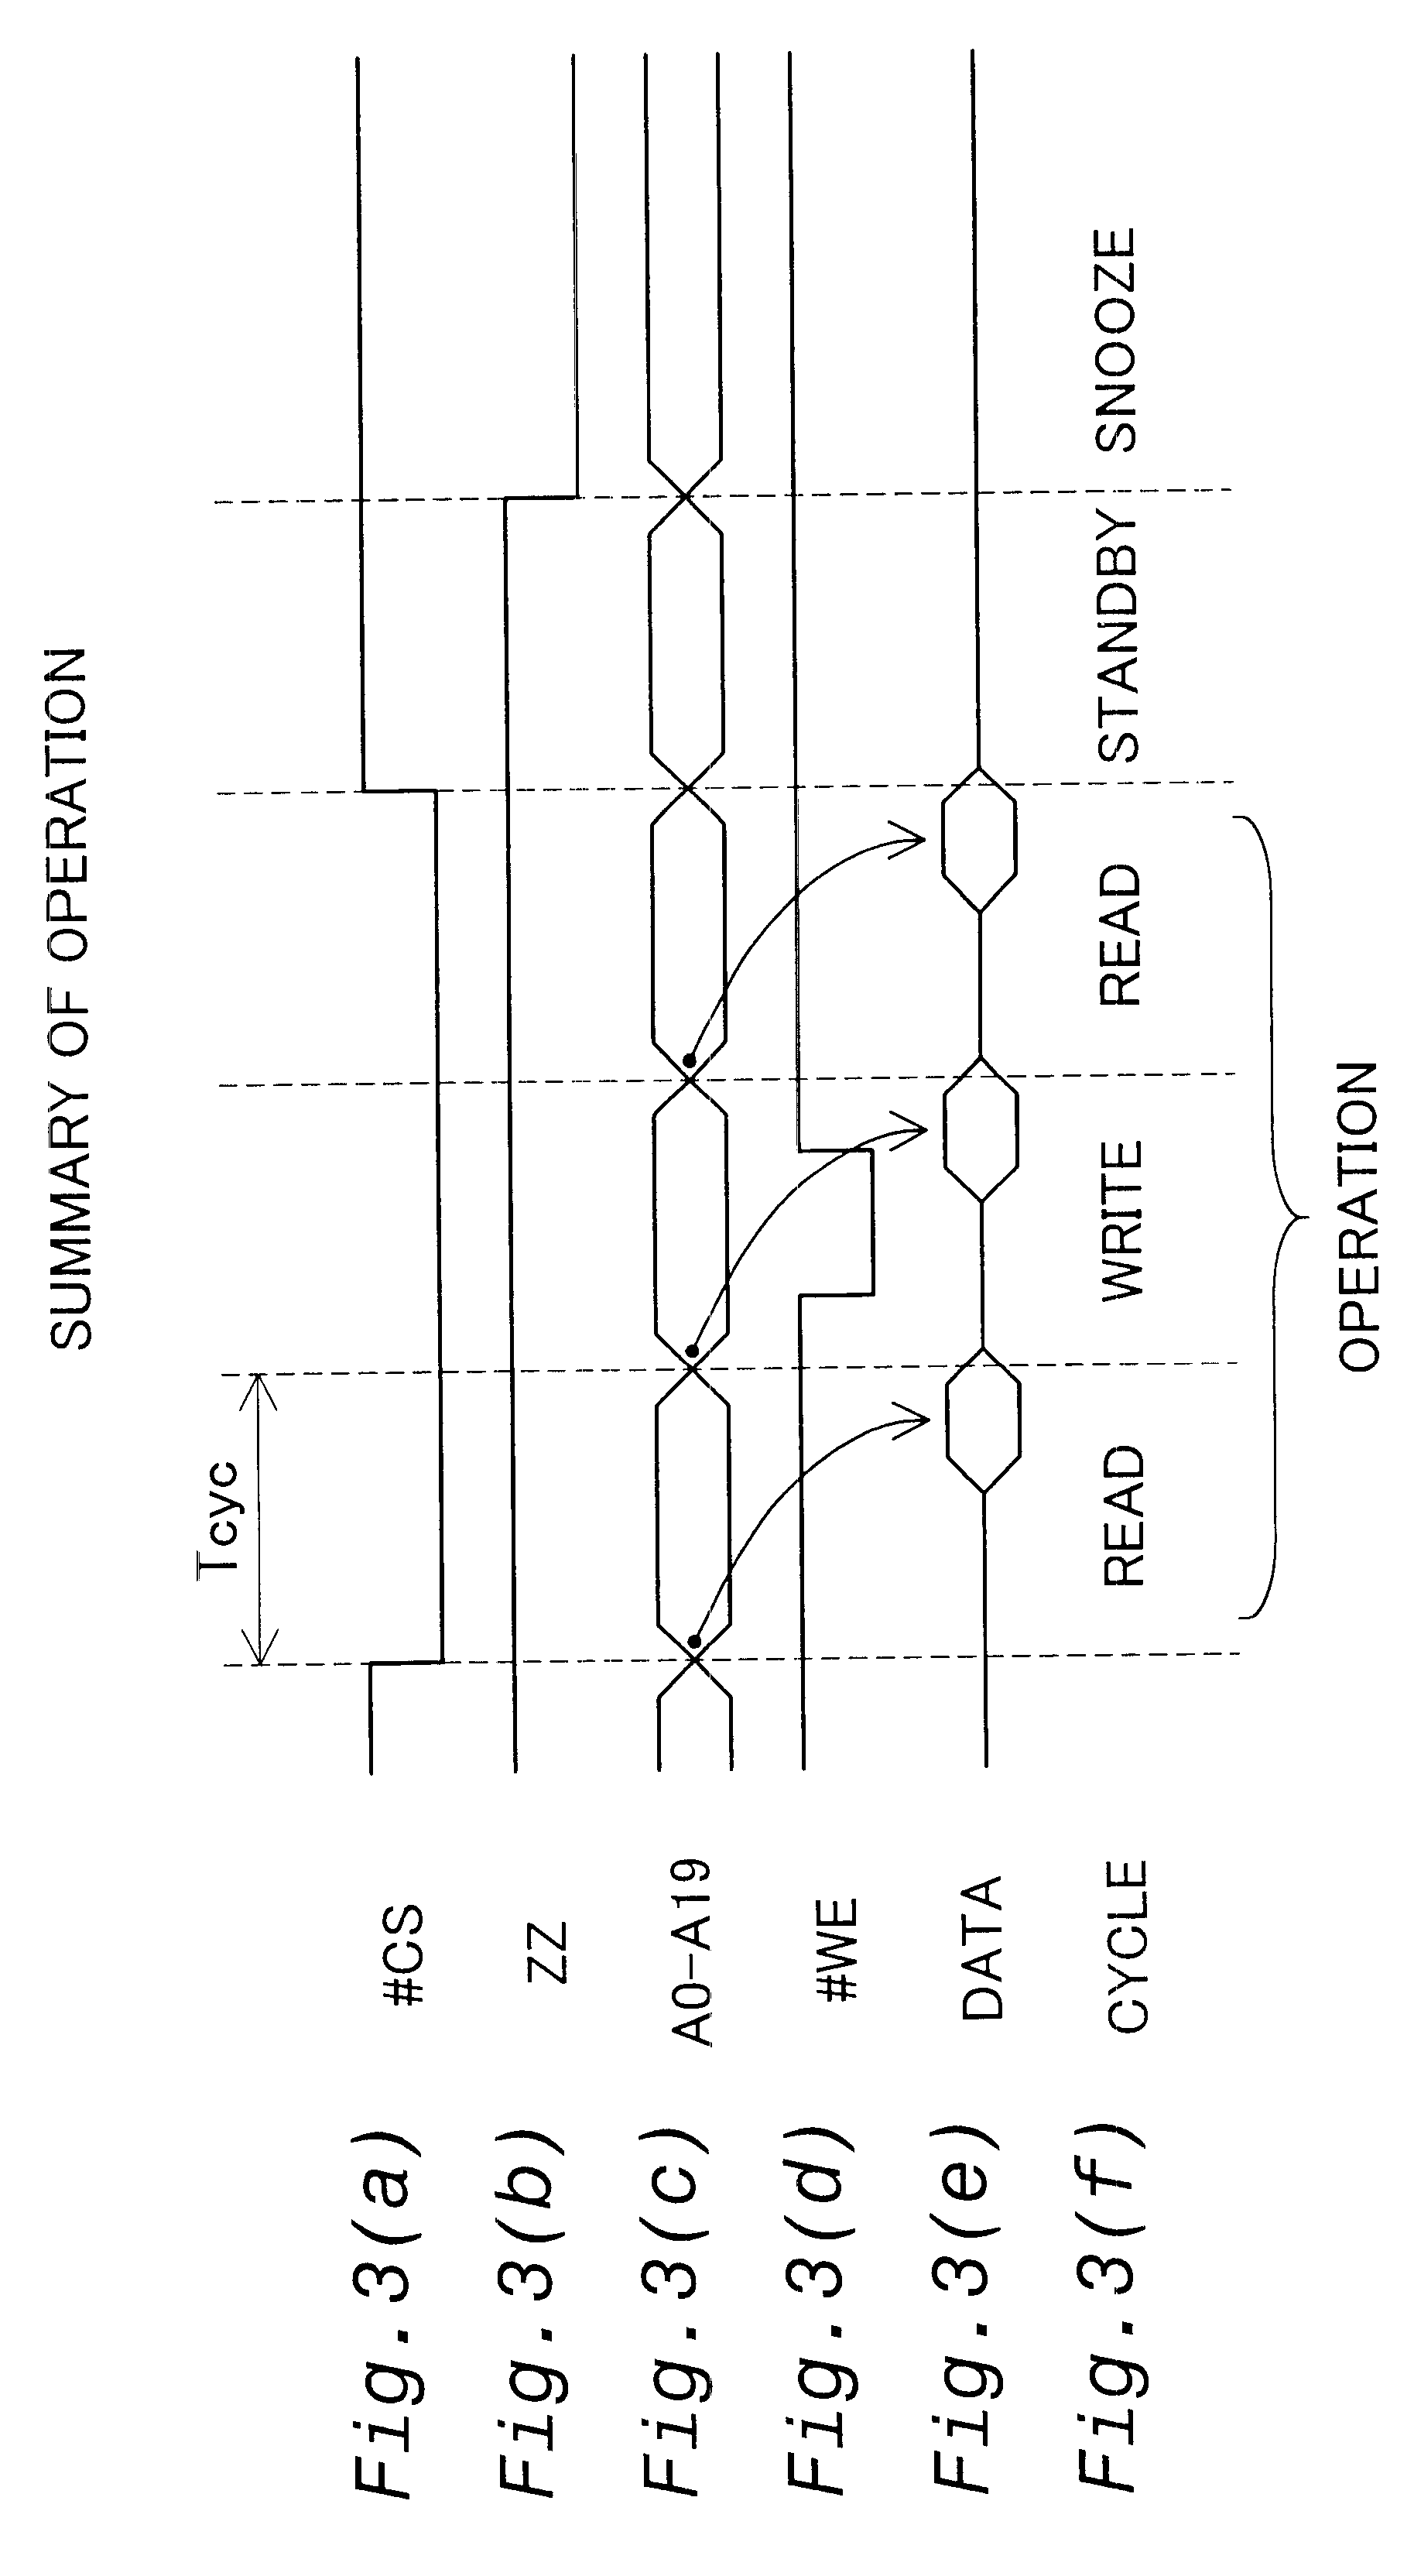 Activation of word lines in semiconductor memory device